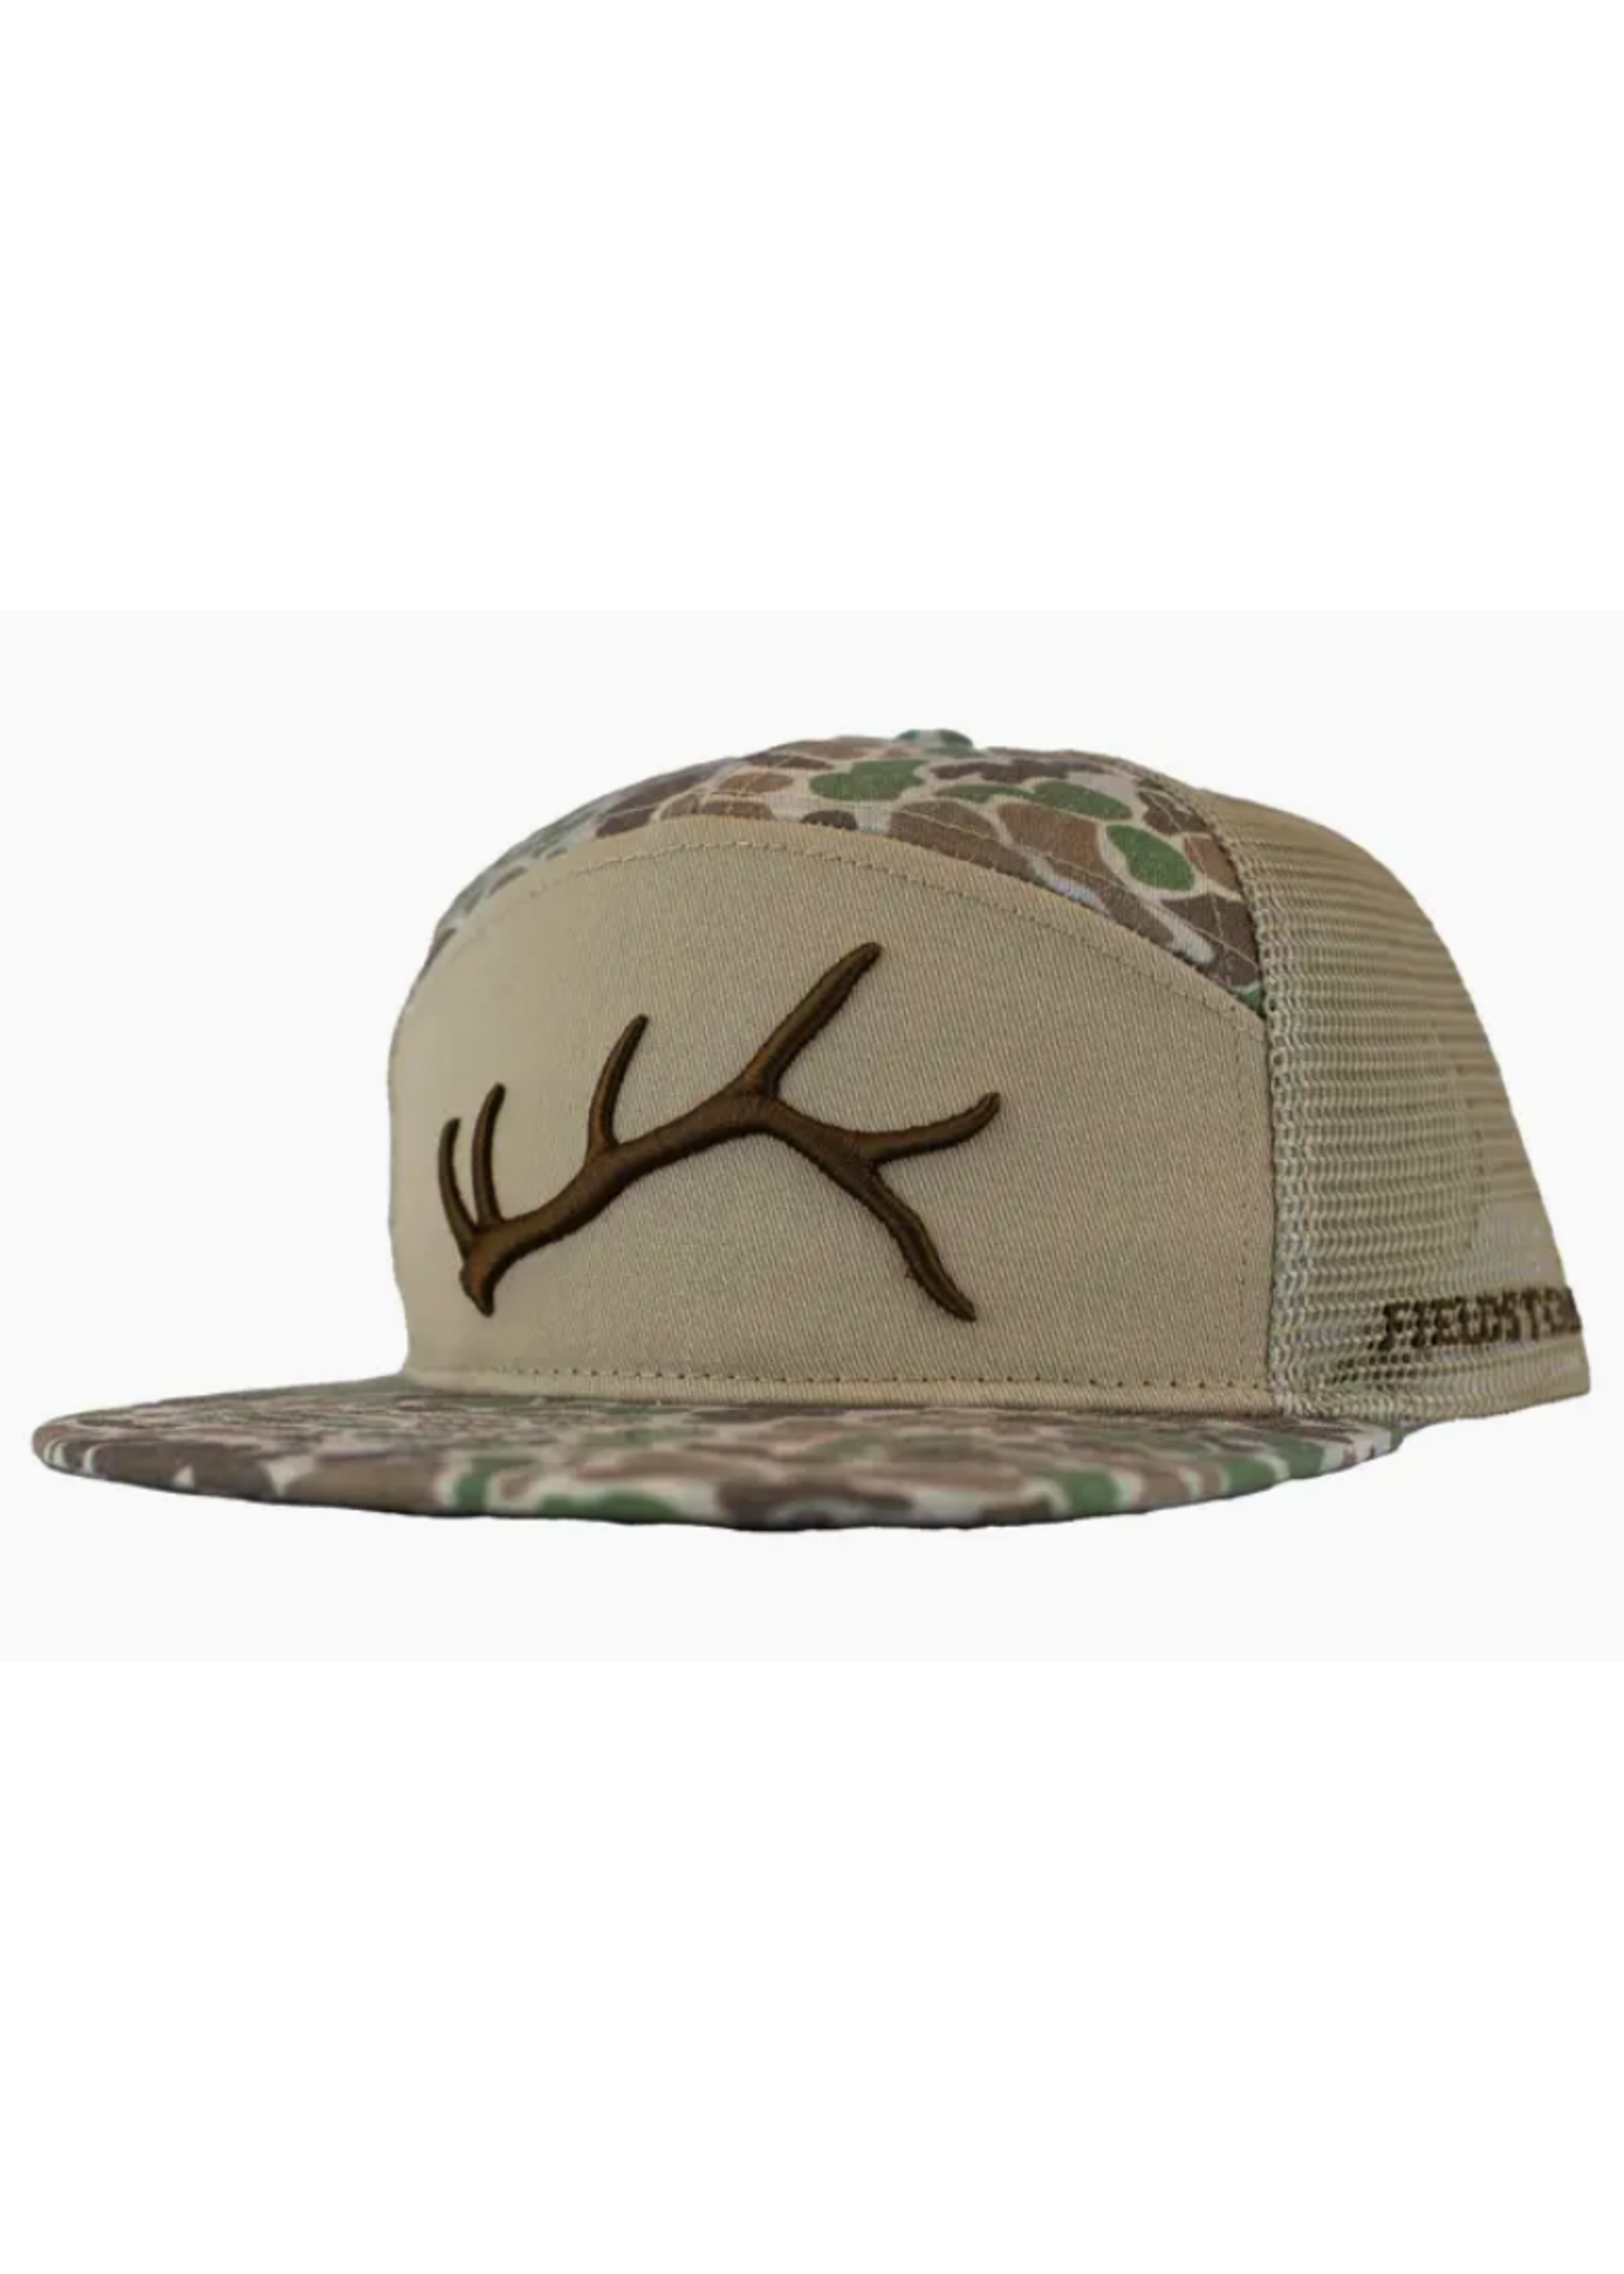 Fieldstone 3D Puff Hat Shed 7 Panel Camo